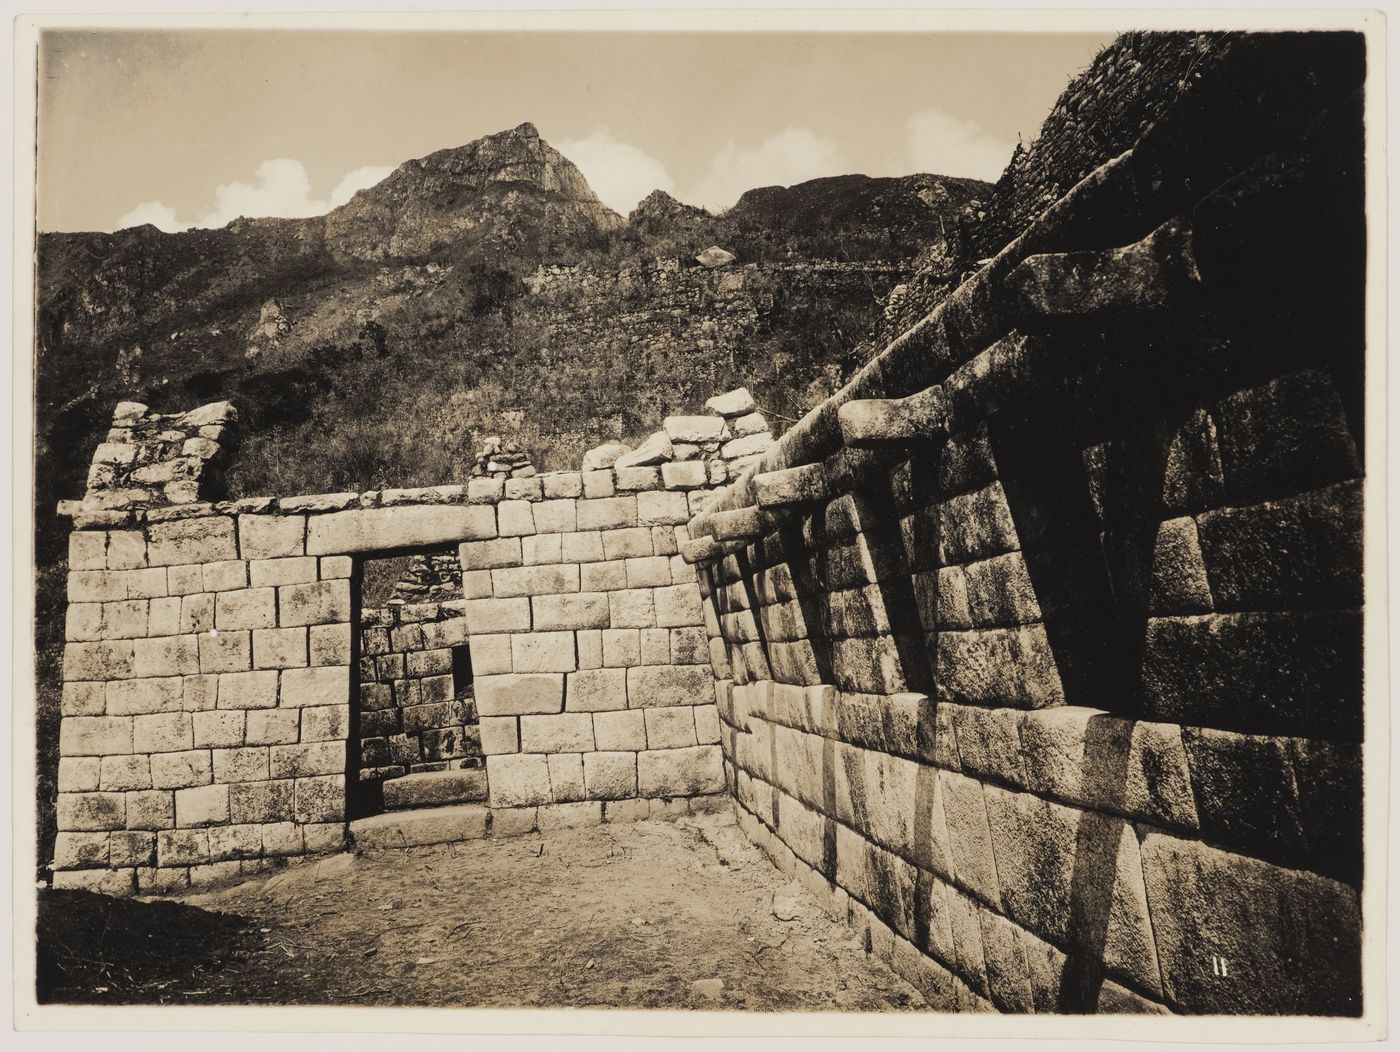 View of unidentified buildings with mountains in the background, Machu Picchu, Peru